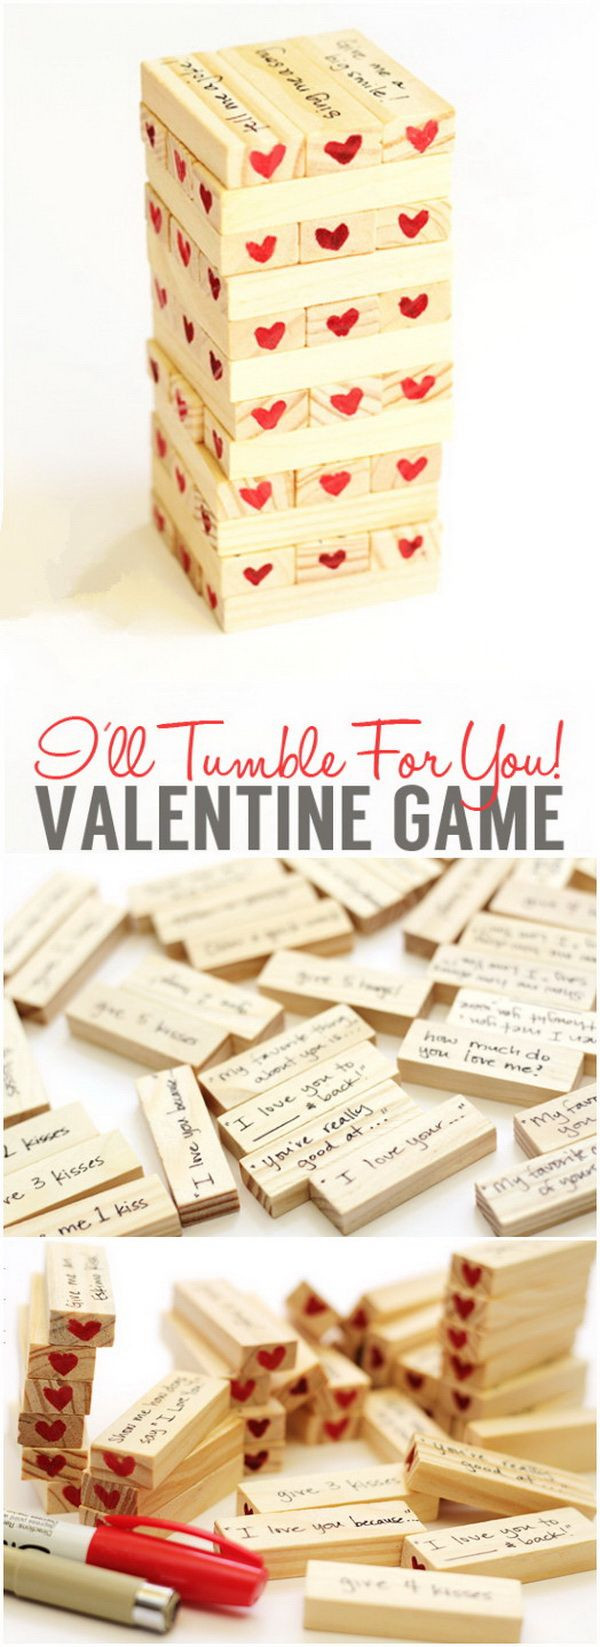 Good Gift Ideas For Valentines Day Boyfriend
 Valentine’s Day Hearty Tumble Game Another fun t idea